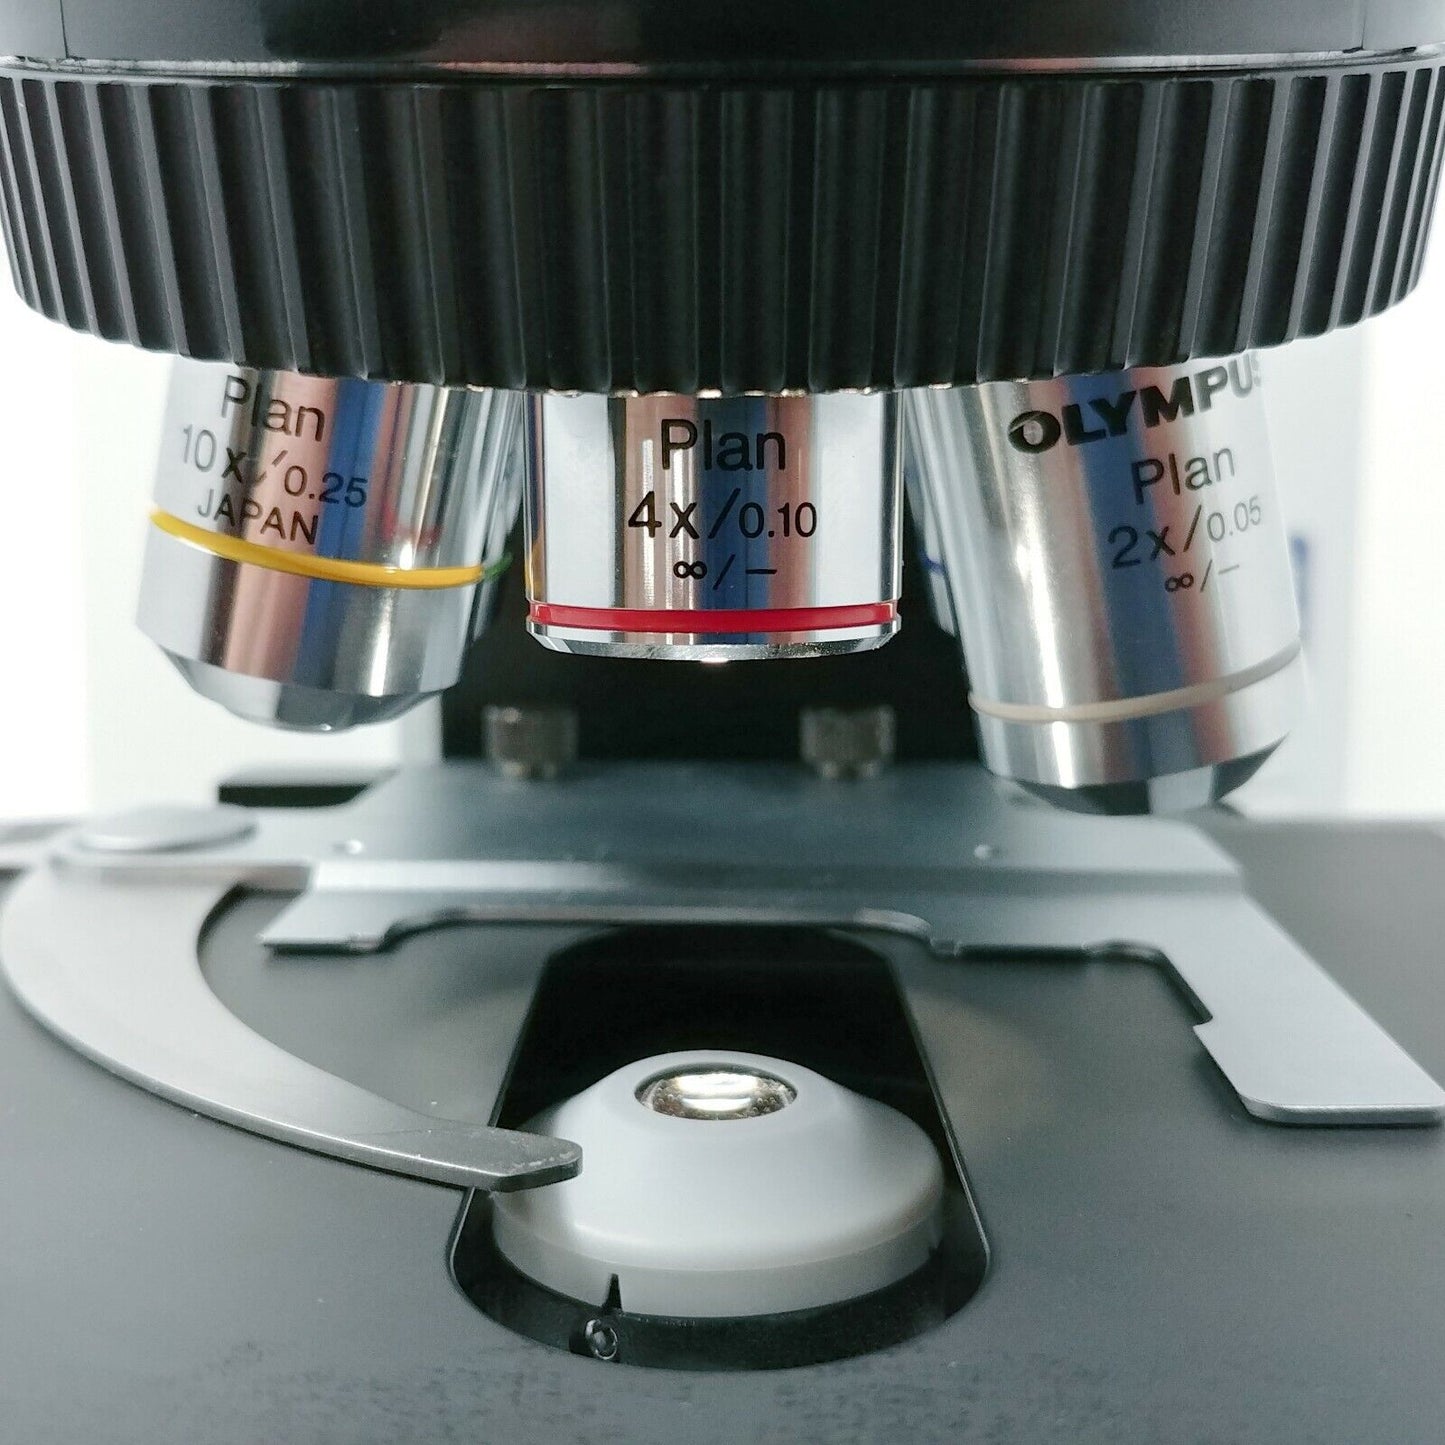 Olympus Microscope BX41 with 2x, 60x, and Camera - microscopemarketplace